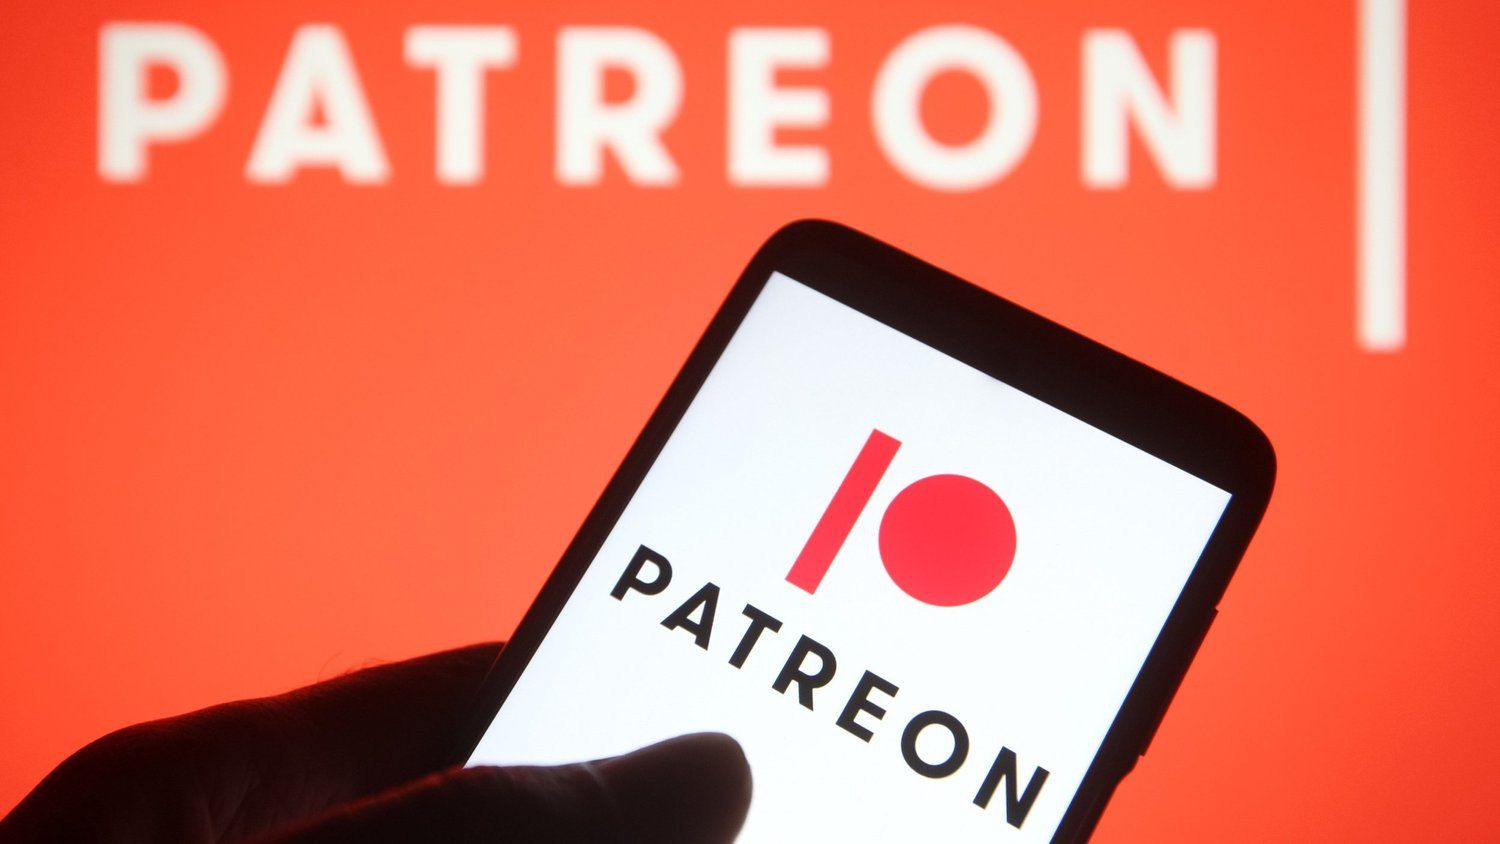 How To Watch Patreon Videos Without Subscribing